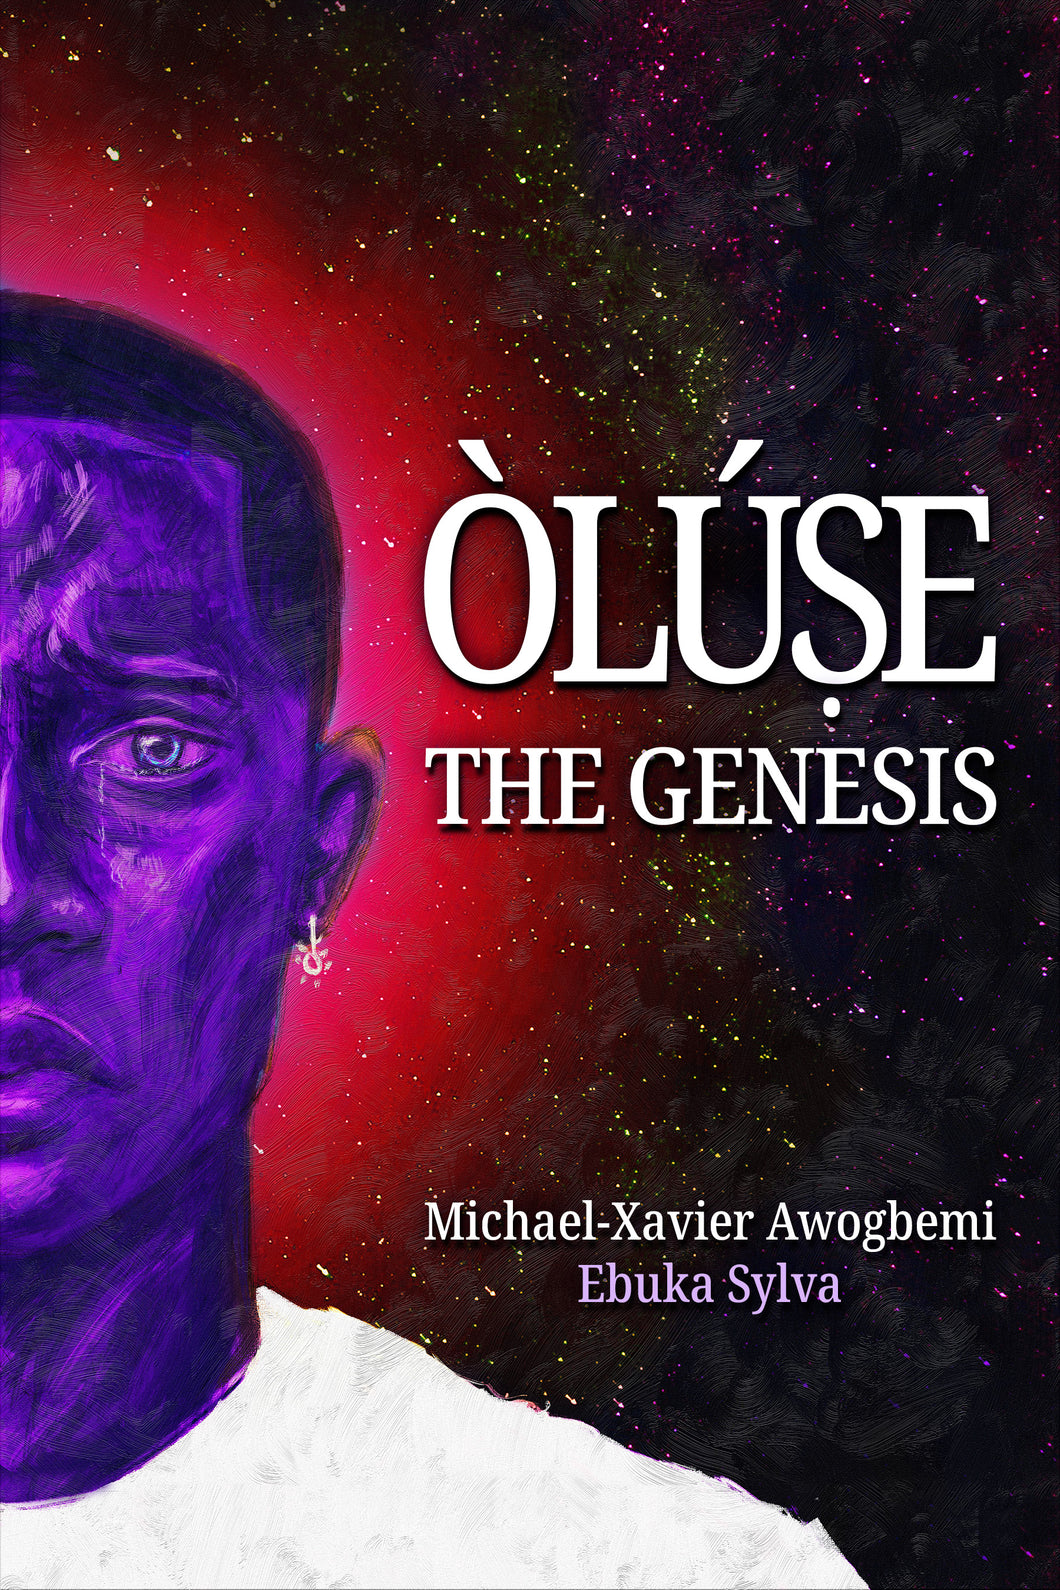 Coming Soon | Oluse: The Genesis by Michael-Xavier Awogbemi and Ebuka Sylva (PAPERBACK)